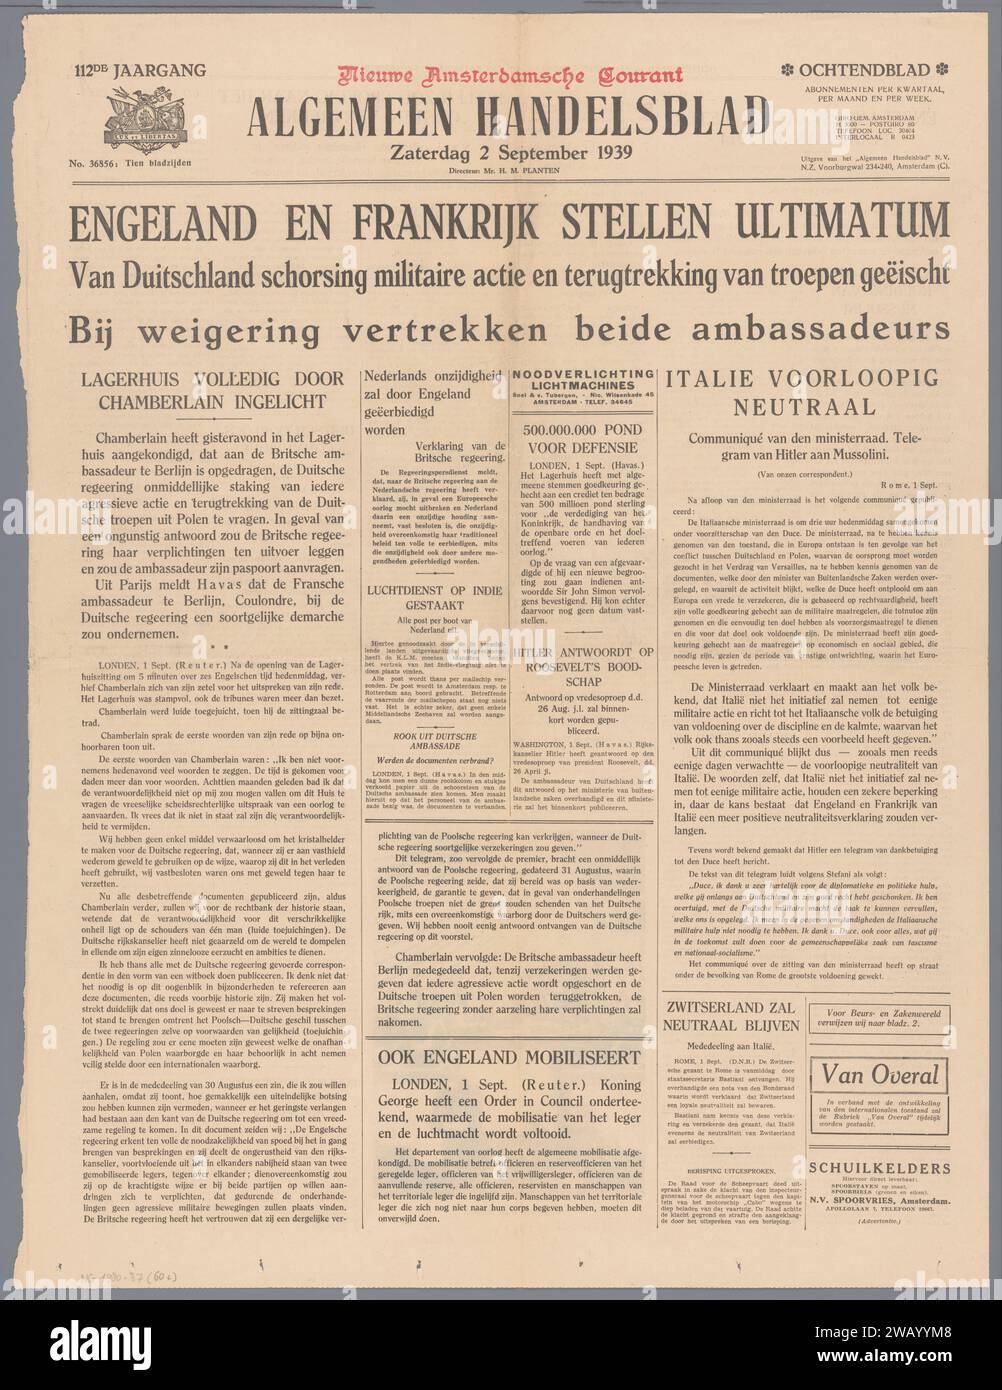 Algemeen Handelsblad, Algemeen Handelsblad, 1939  Newspaper about the German invasion in Poland, pp. 1 & 2 of No. 36856 of the 112nd volume of the Algemeen Handelsblad. Amsterdam paper printing  Poland Stock Photo